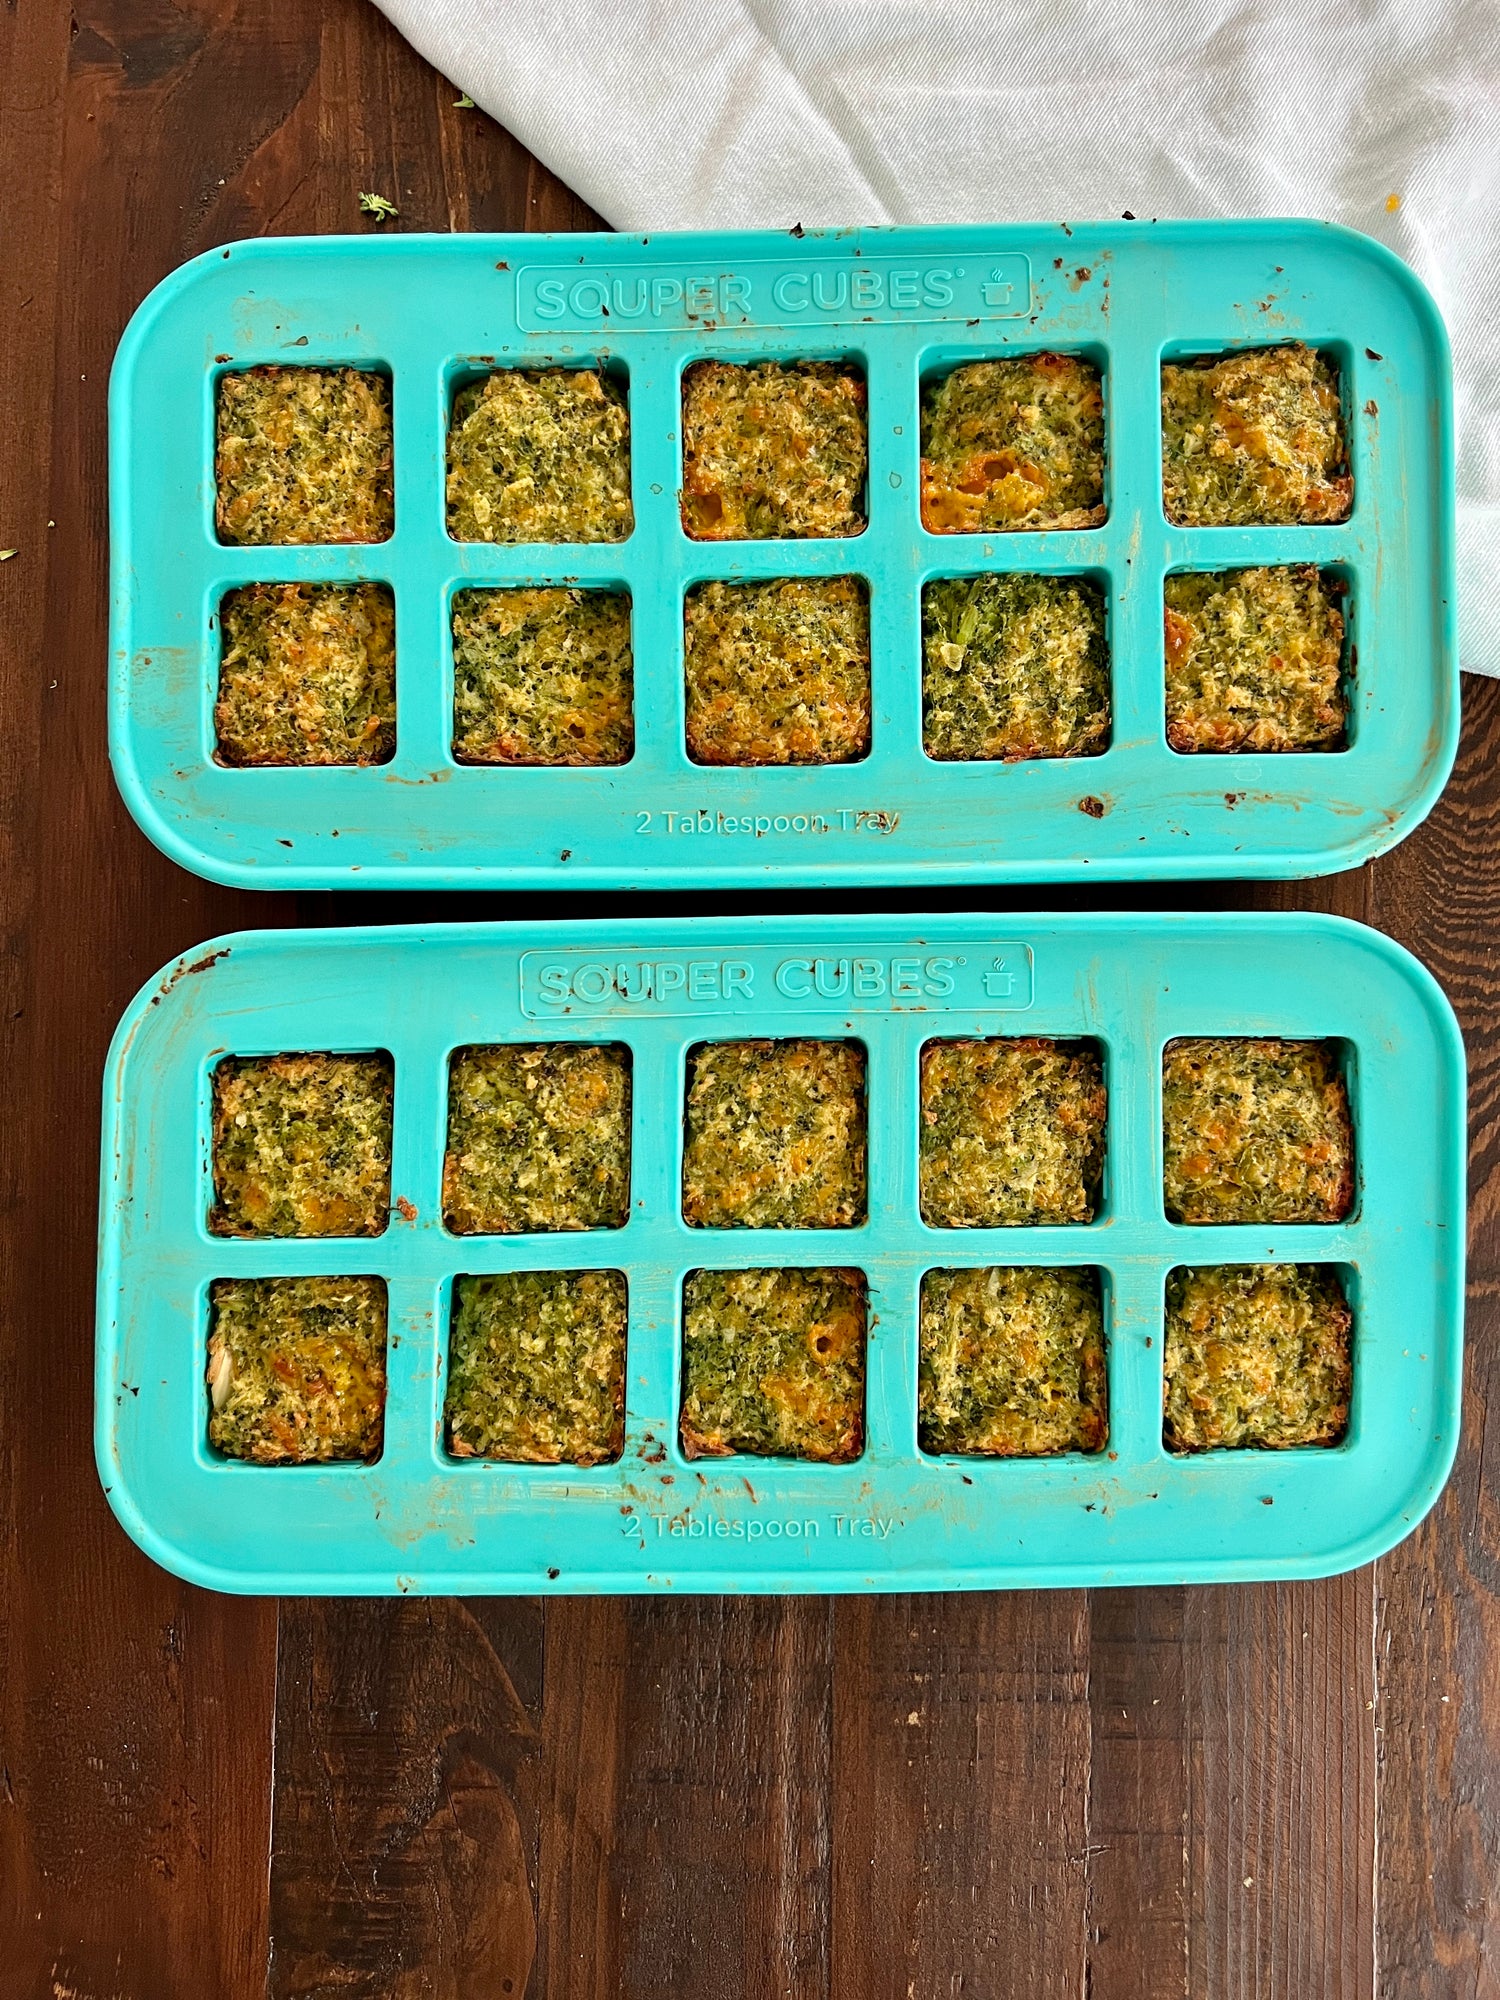 Easy ways to use Souper Cubes for Single Serving Freezer Meals